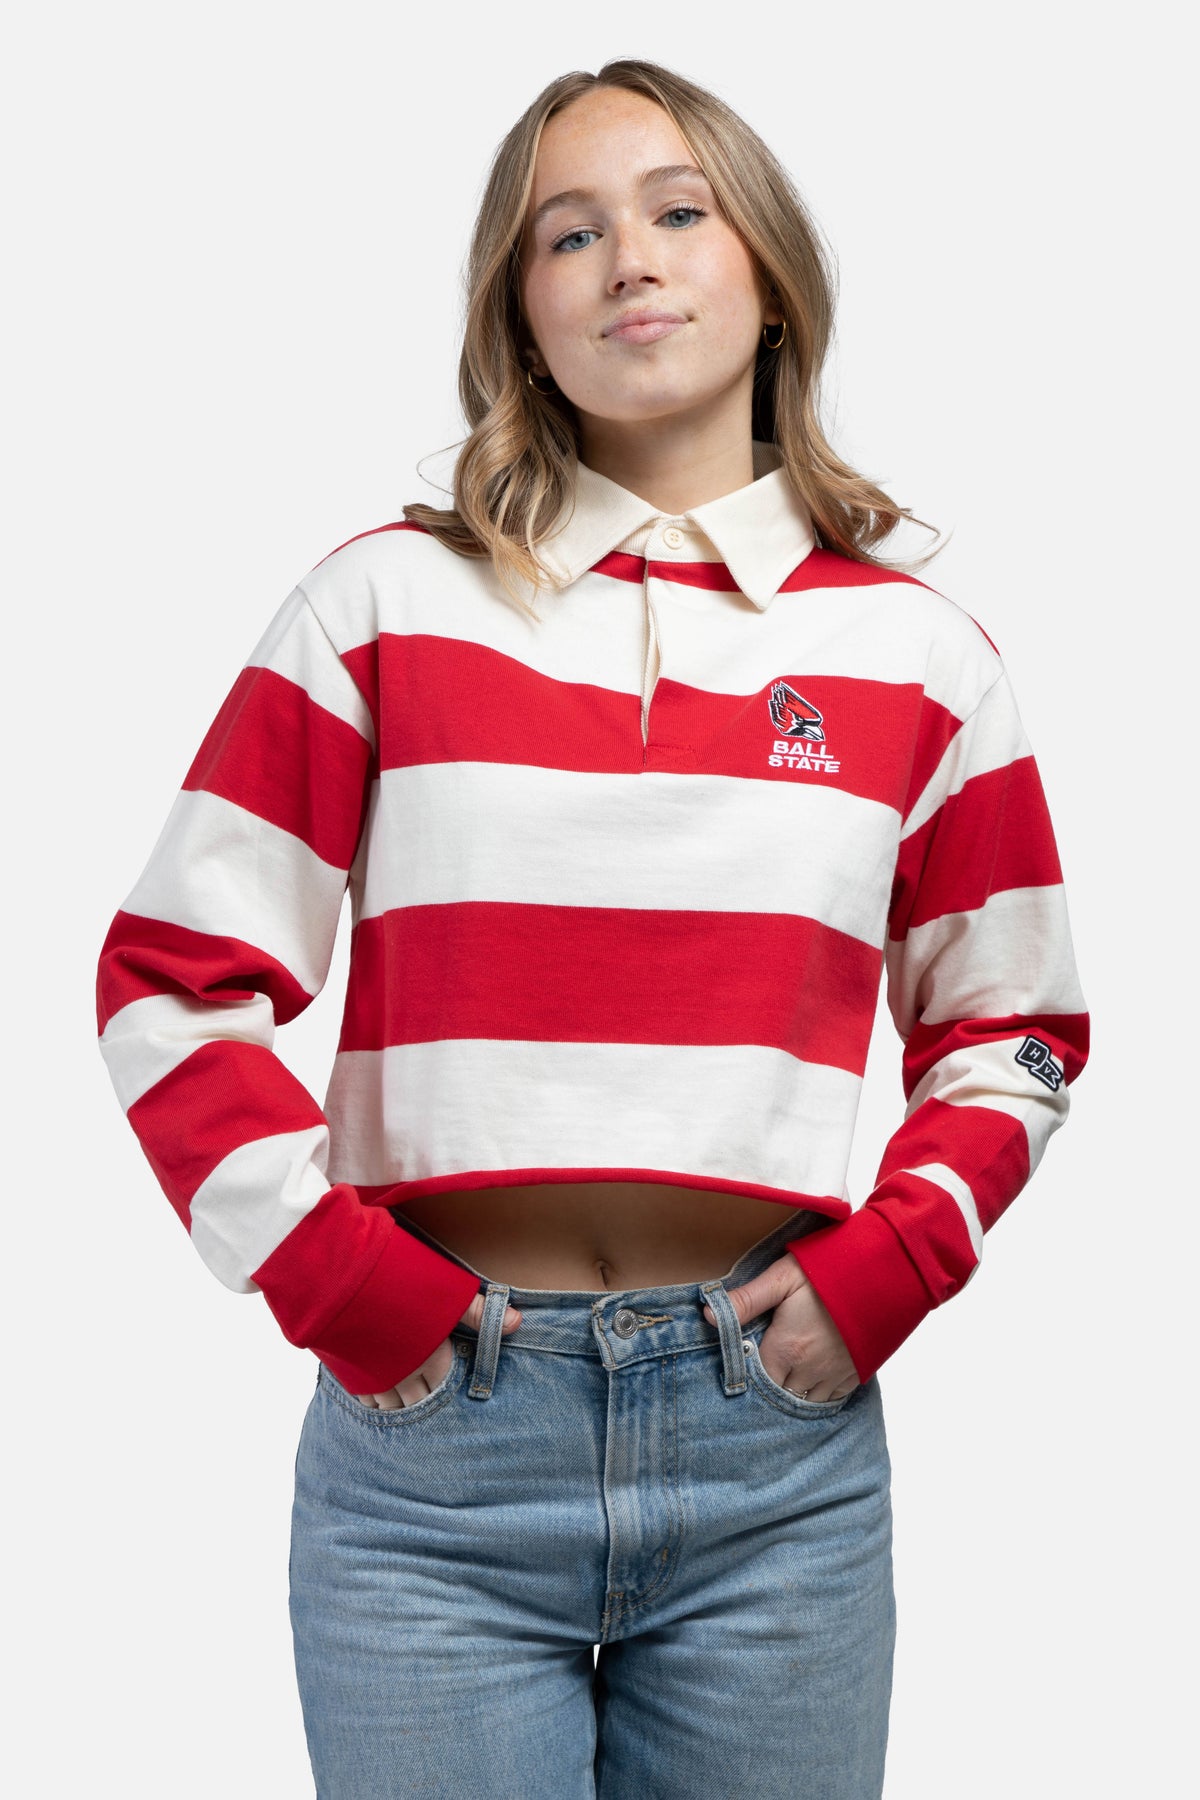 Ball State Rugby Top